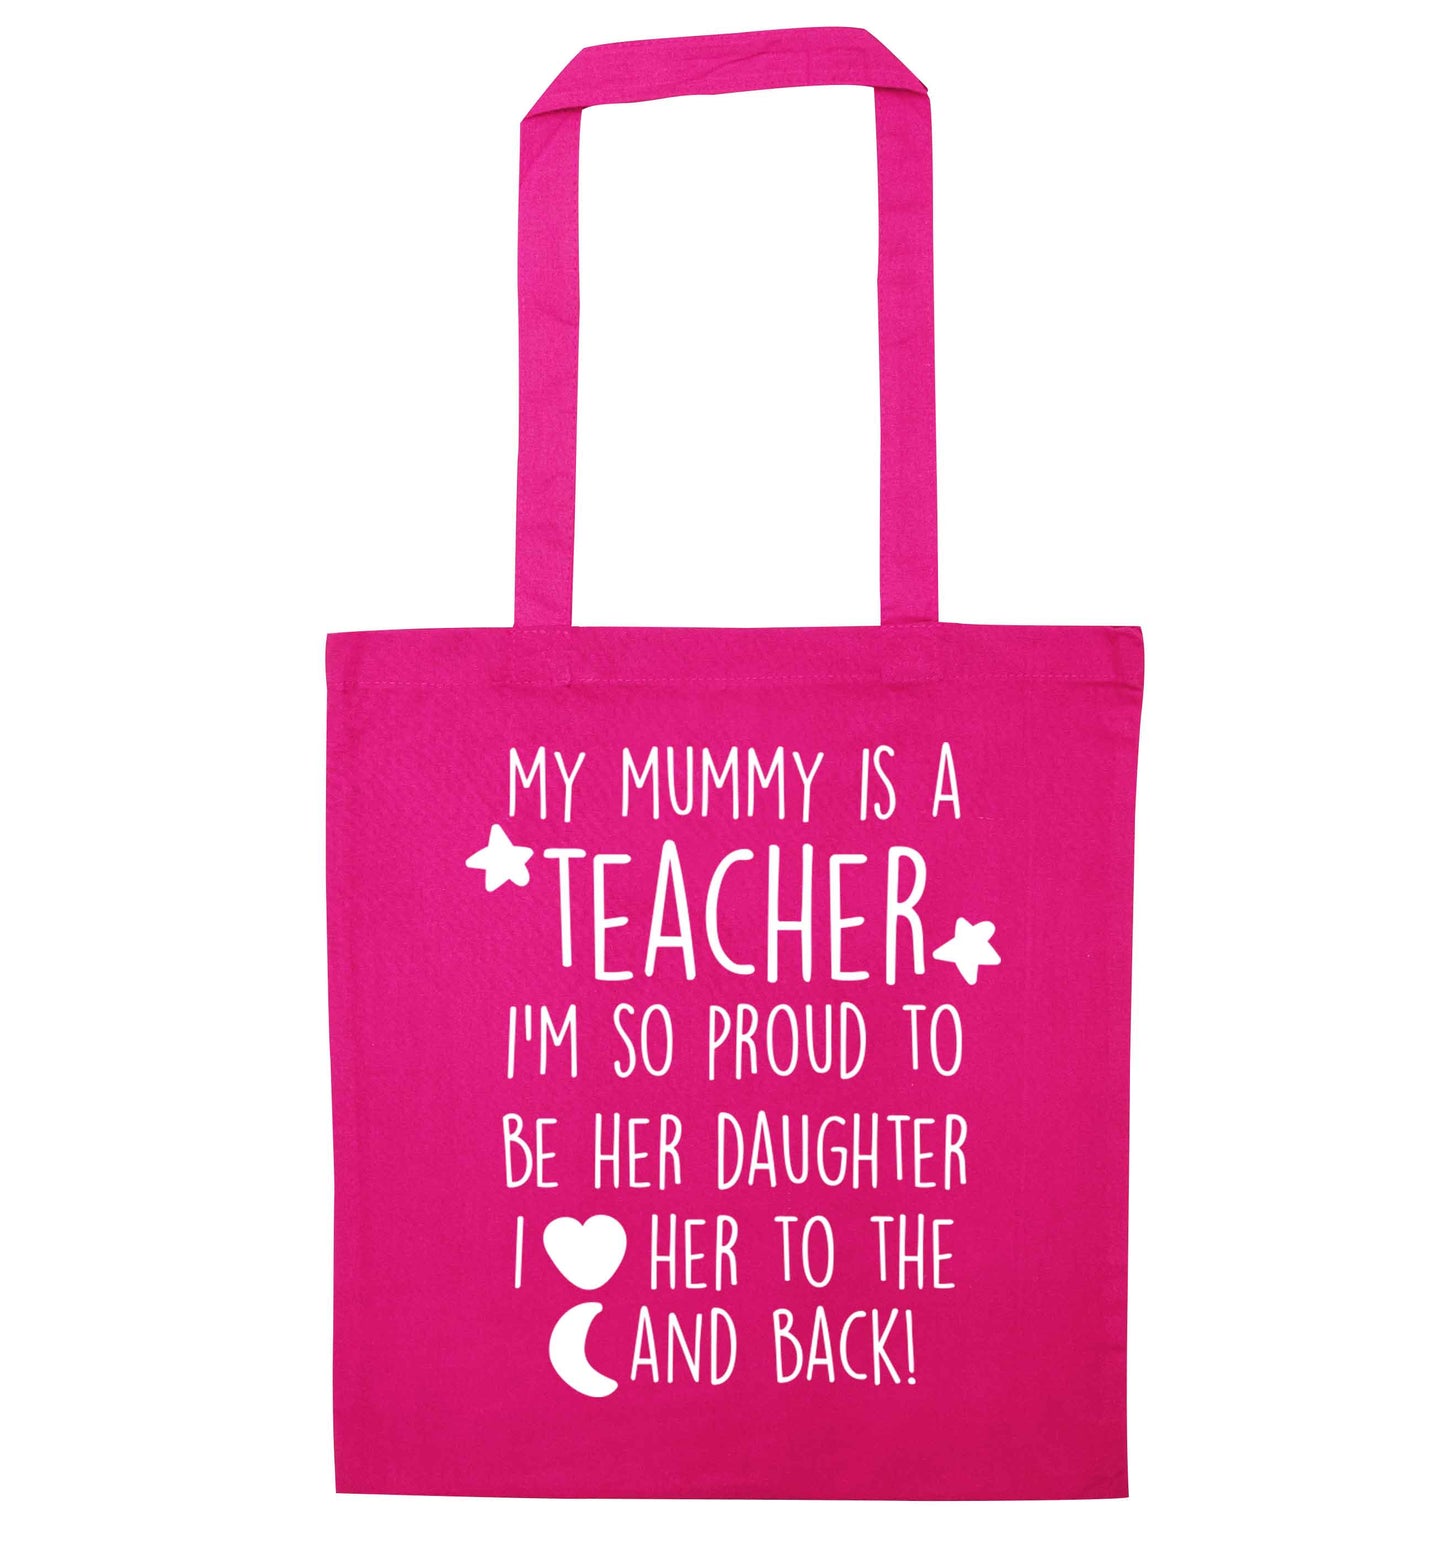 My mummy is a teacher I'm so proud to be her daughter I love her to the moon and back pink tote bag